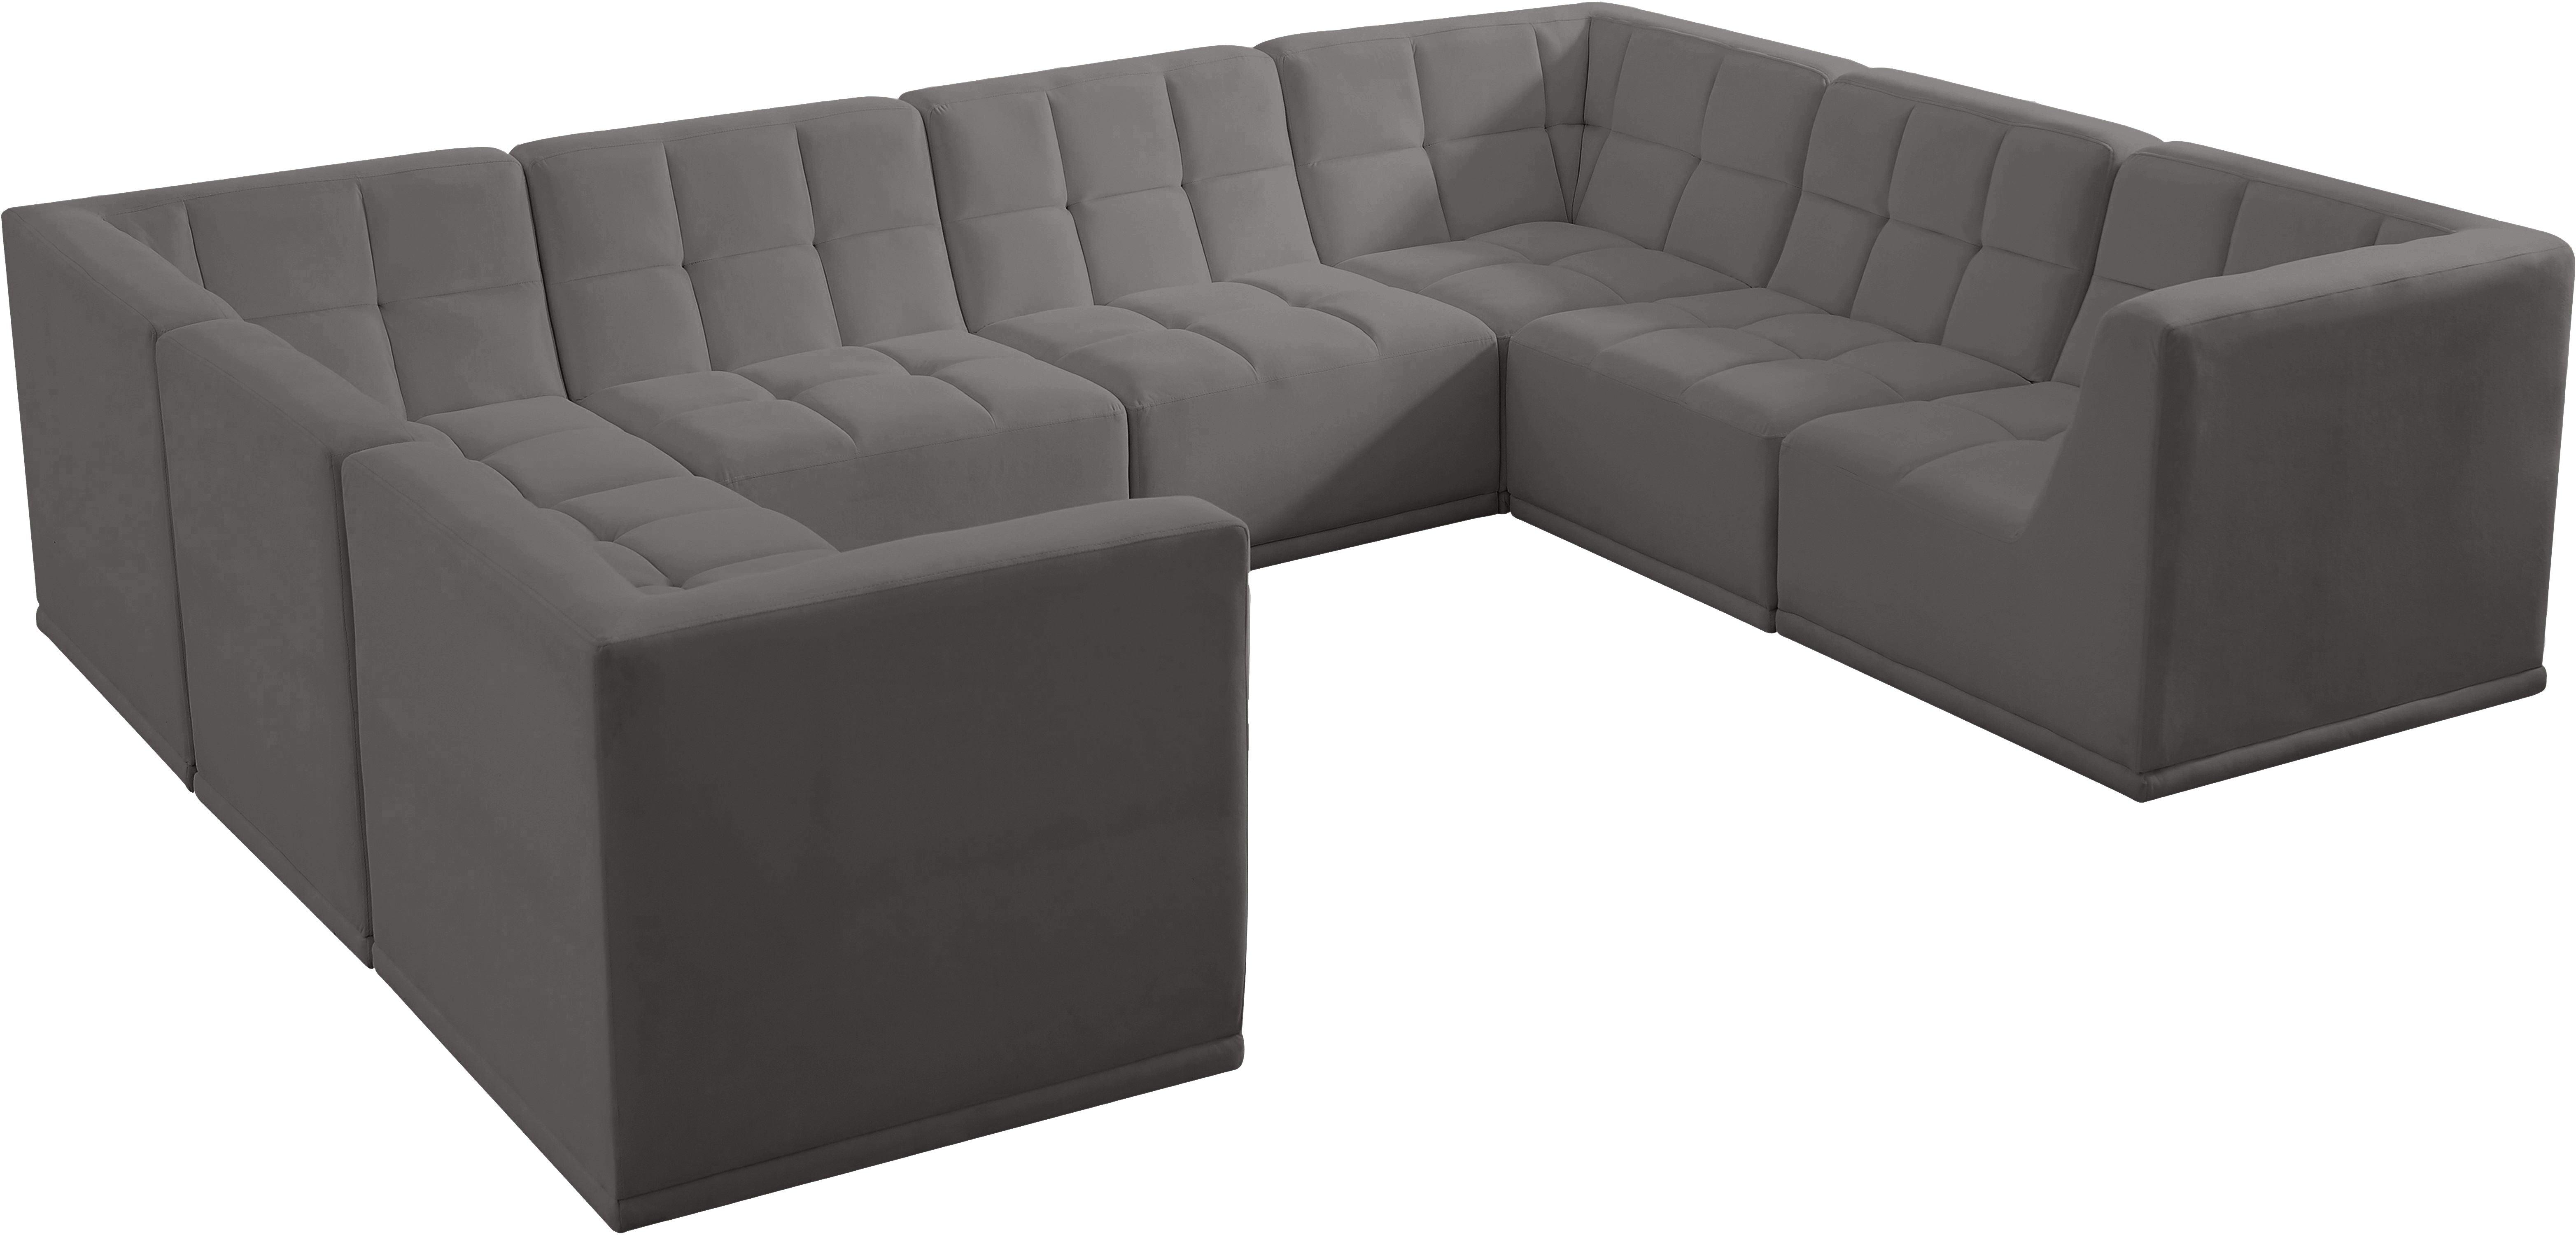 Meridian Furniture - Relax - Modular Sectional - Gray - 5th Avenue Furniture